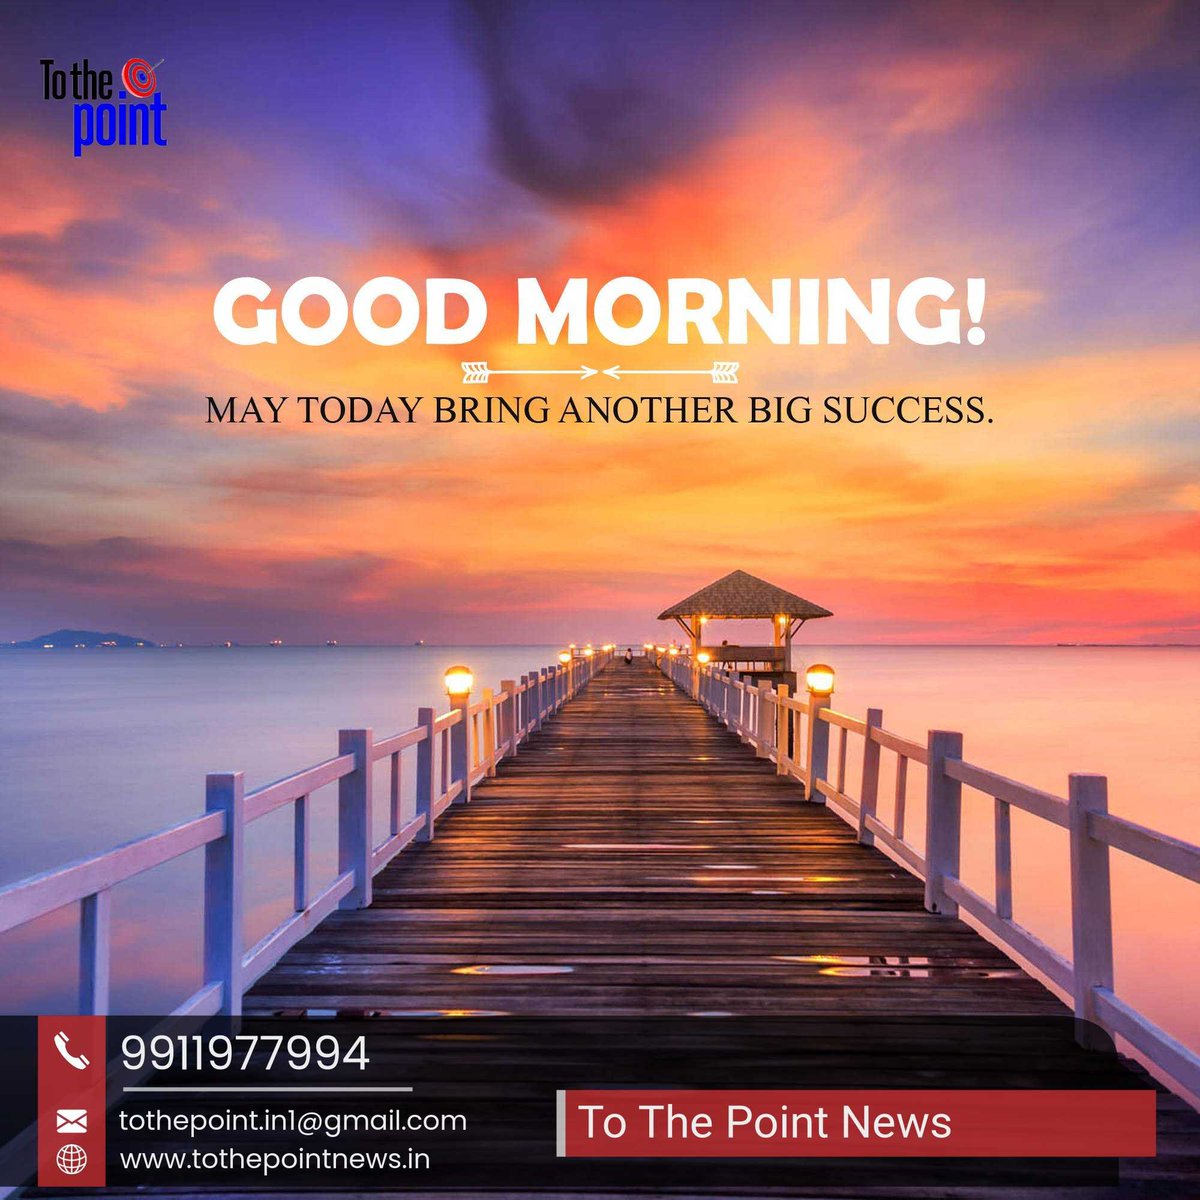 Greetings from To The Point News
 #goodmorning #fitness #gutenmorgen #instagood #bomdia #travel #haveagoodday #coffeetime #morningdrawing #instamorning #likeforlikes